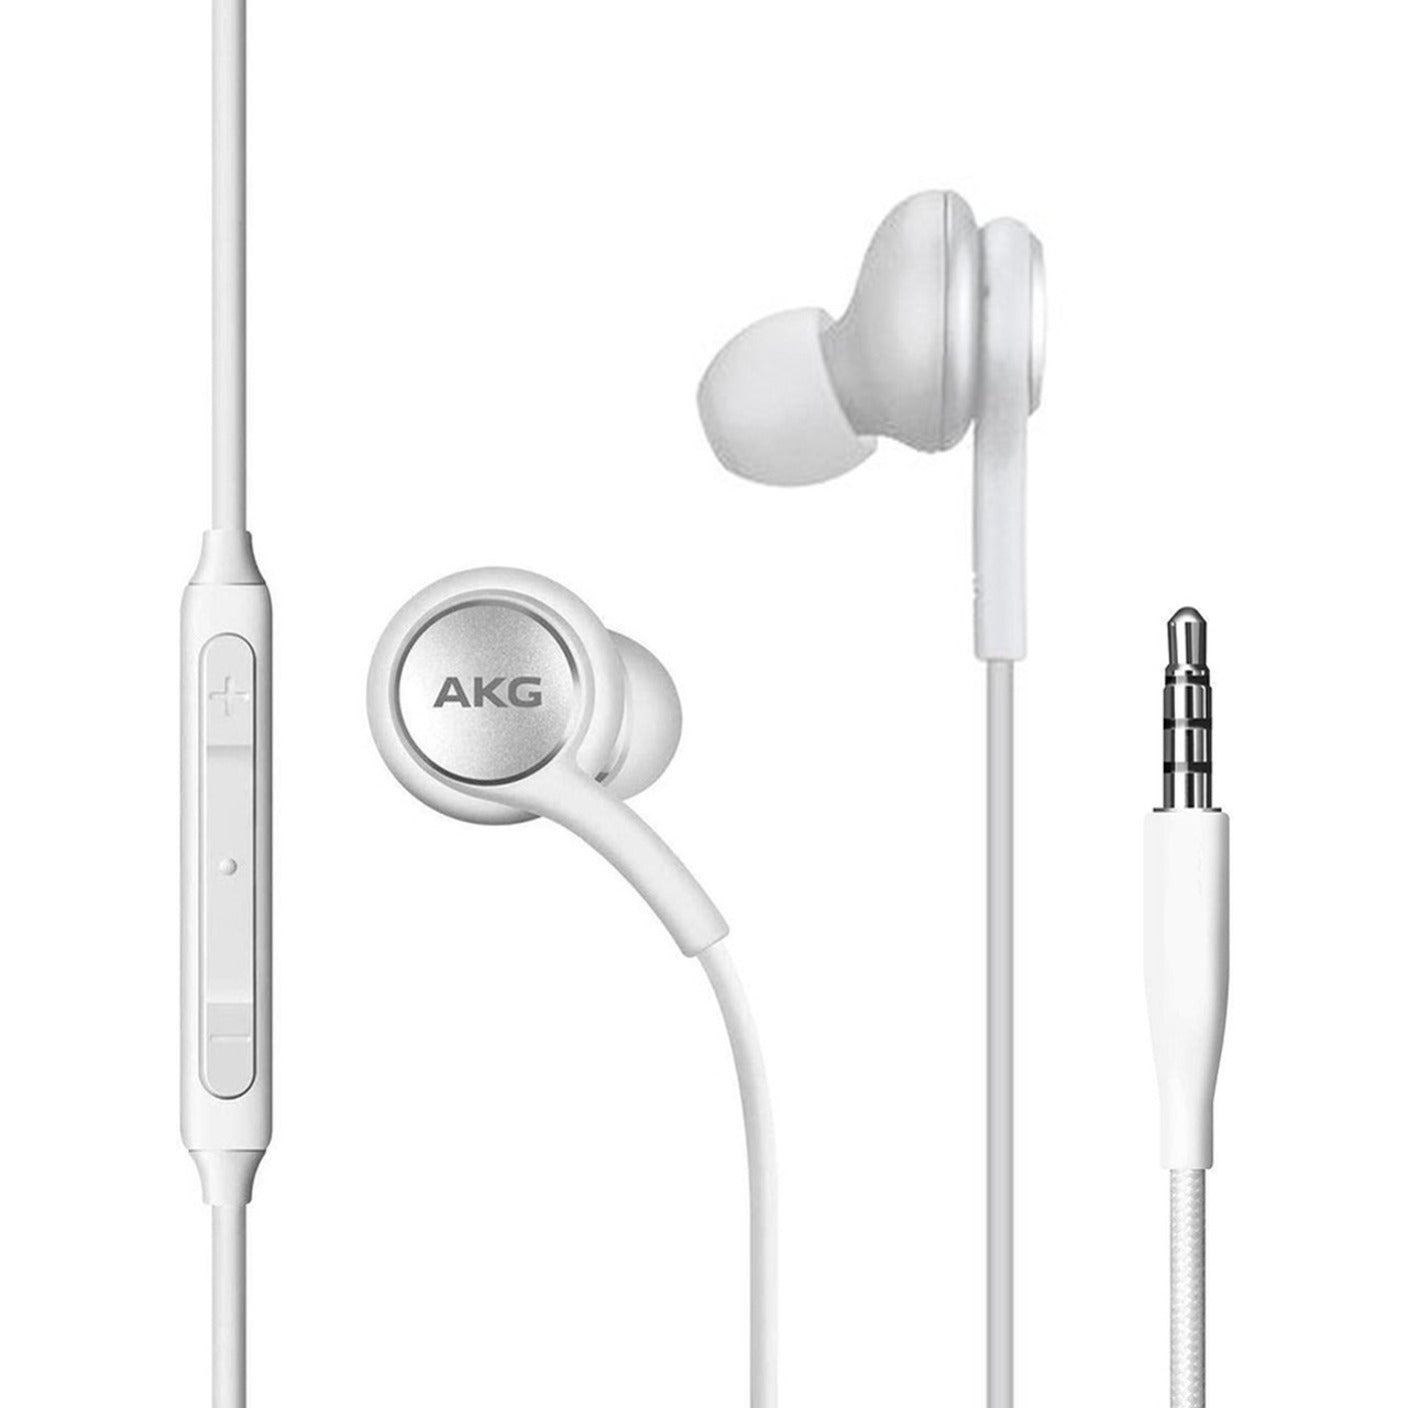 4XEM 4XSAMEARAKGW 3.5mm AKG Earphones with Mic and Volume Control (White), In-Line Controller, Y Cable